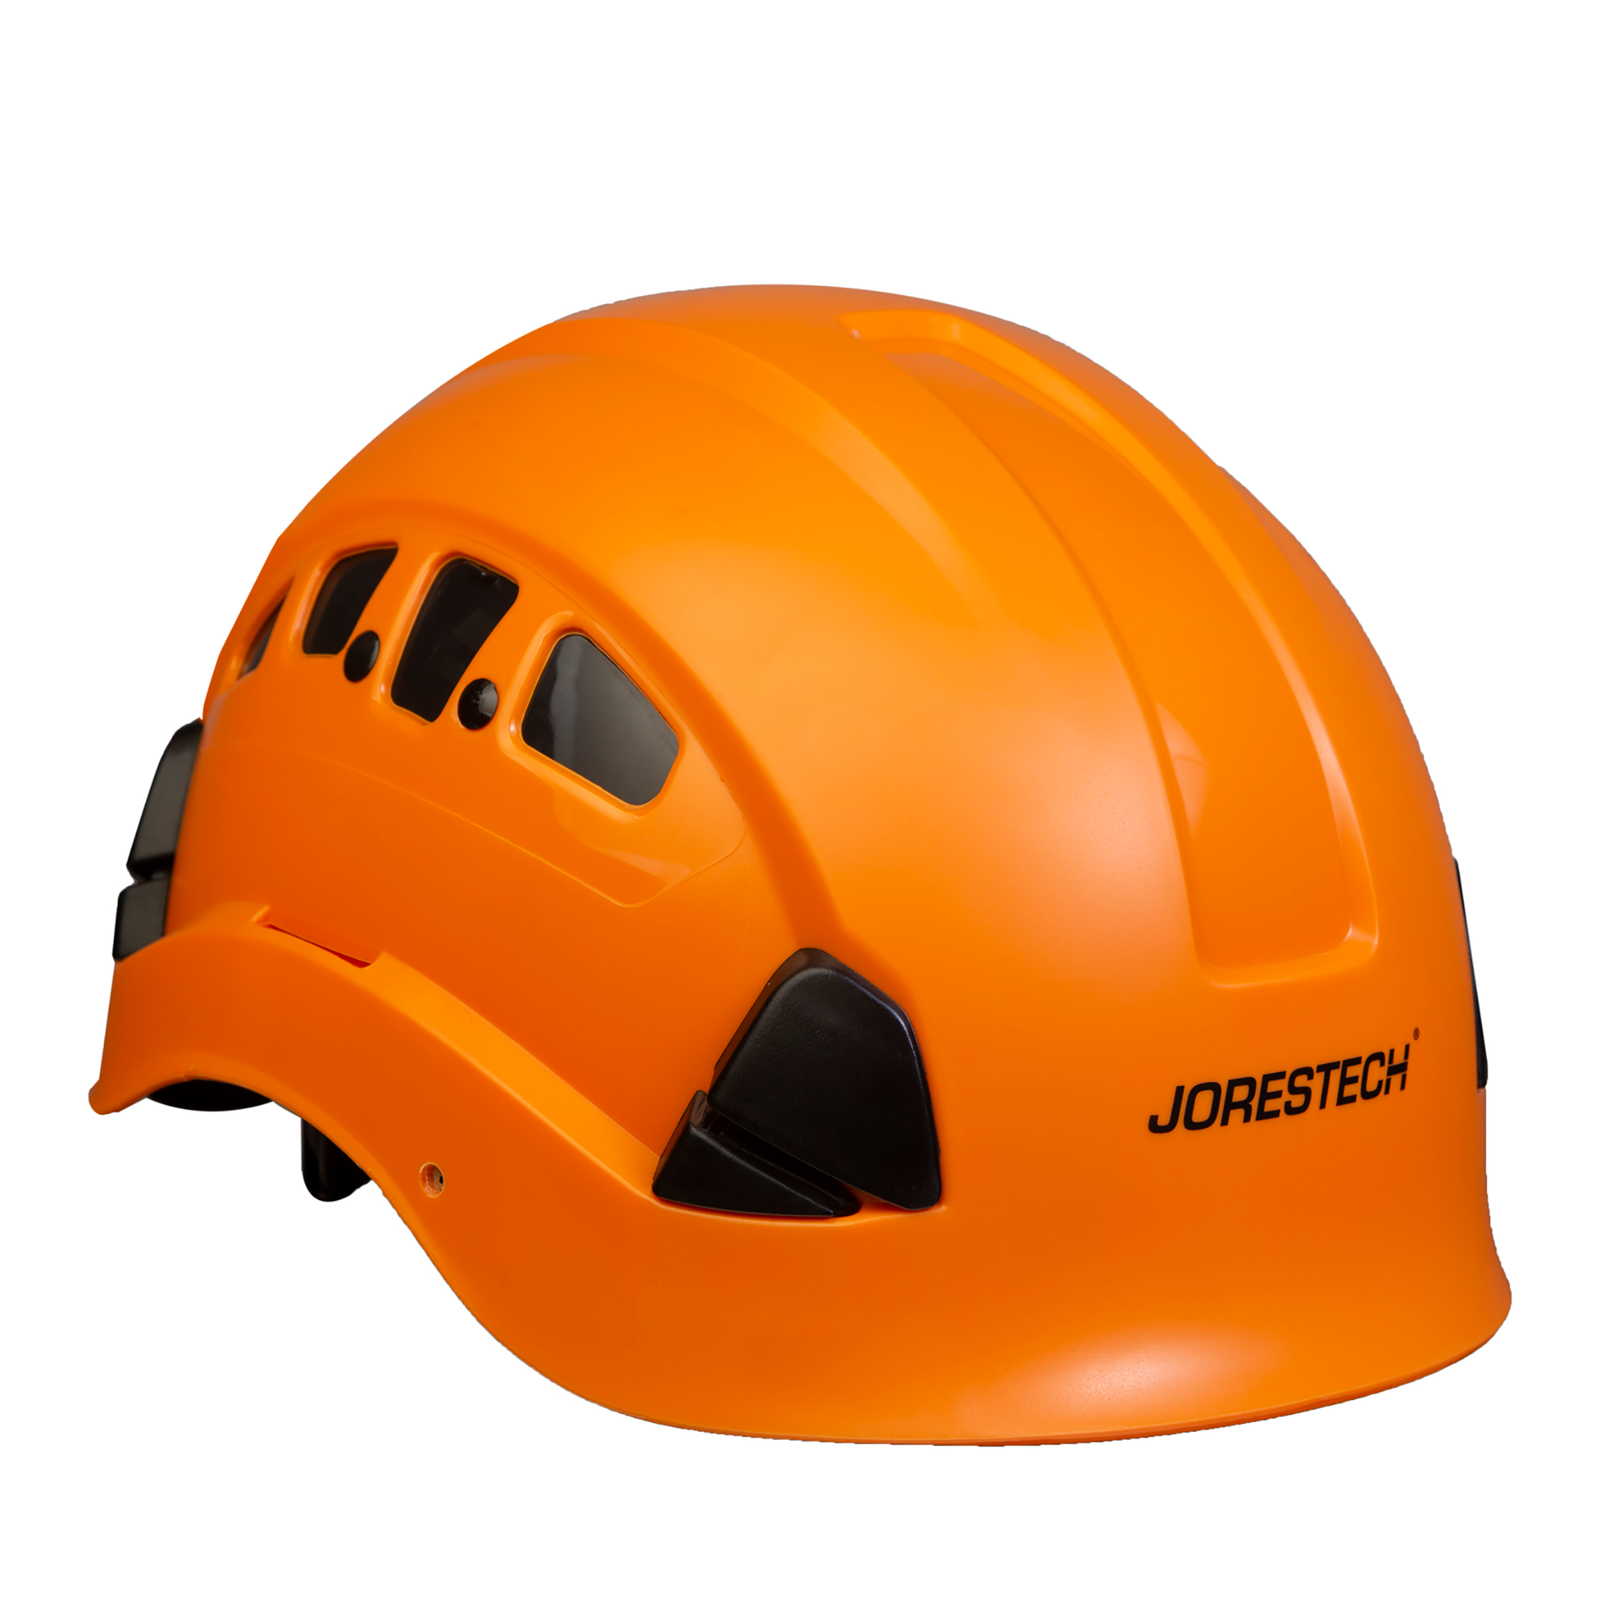 diagonal view of the Jorestech orange ventilated hard hat with adjustable 6 point suspension and chin strap